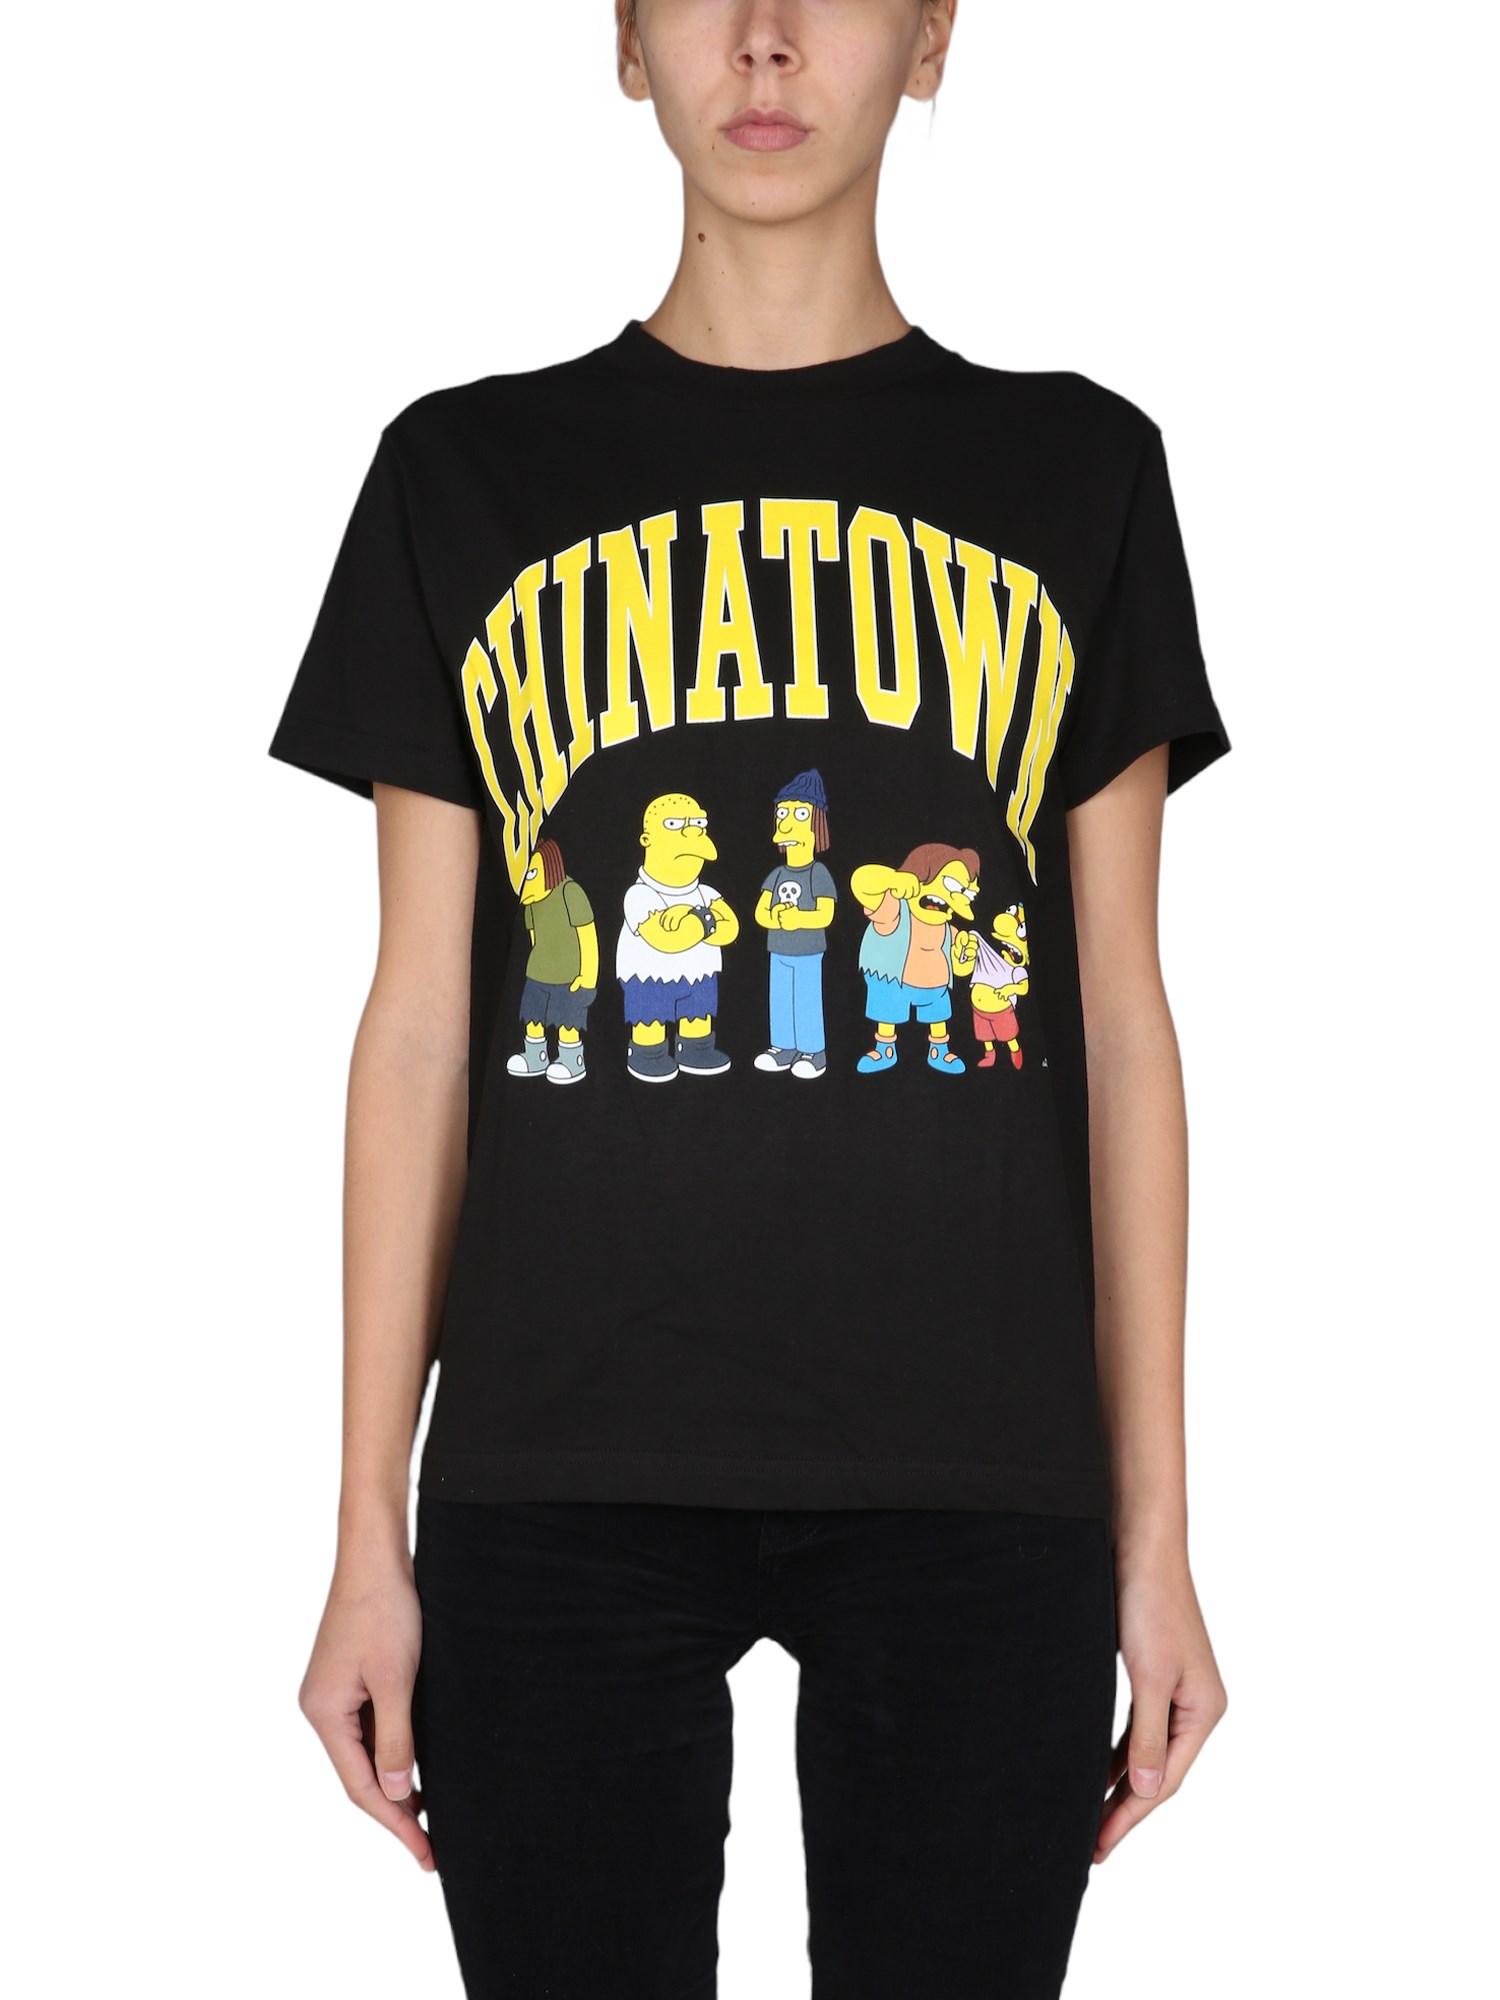 chinatown market x the simpsons 